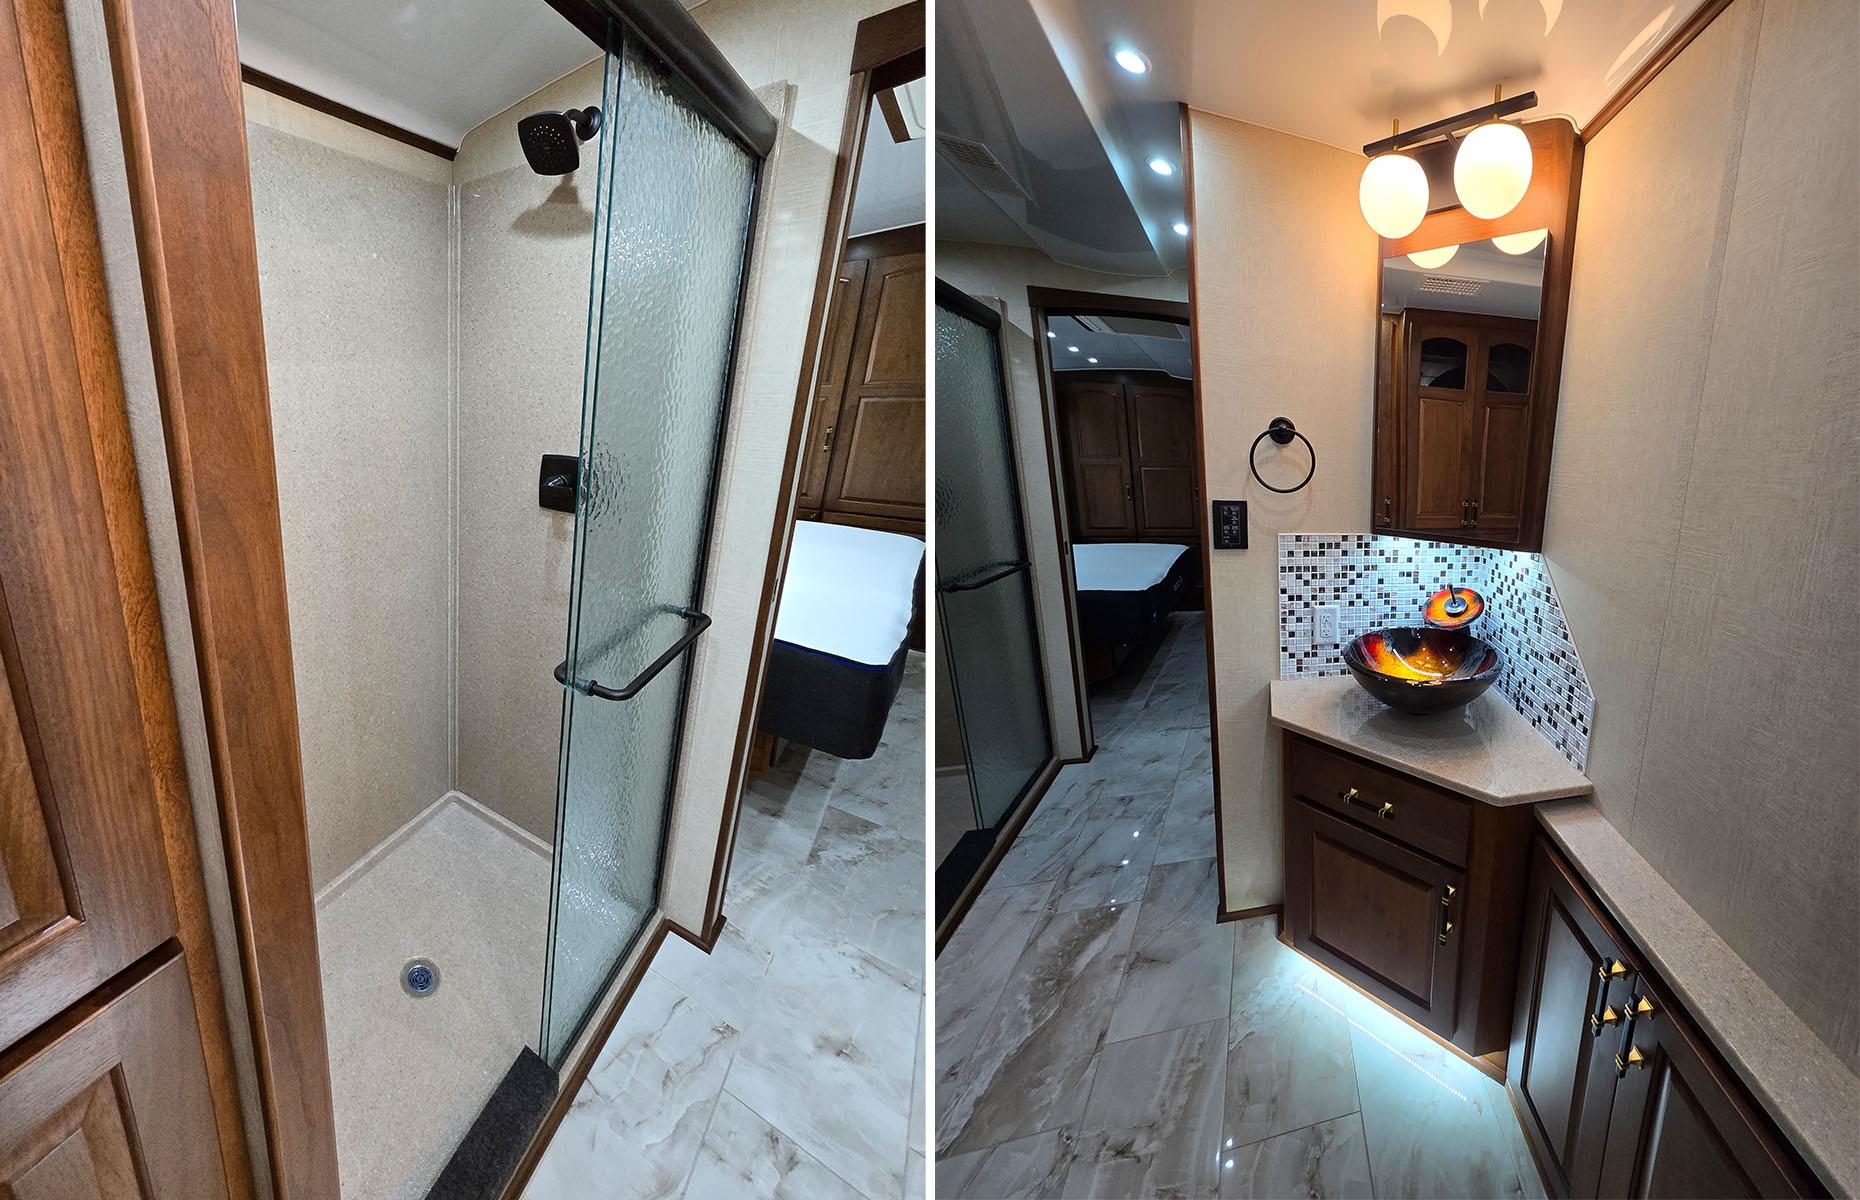 <p>According to SpaceCraft, they can do anything within the parameters of regulations, imagination, budget, and physics, so there's a plethora of bathroom design options – you could even design your very own mobile spa. This layout includes a spacious shower and decorative hand basin with another distinctive mosaic backsplash.</p>